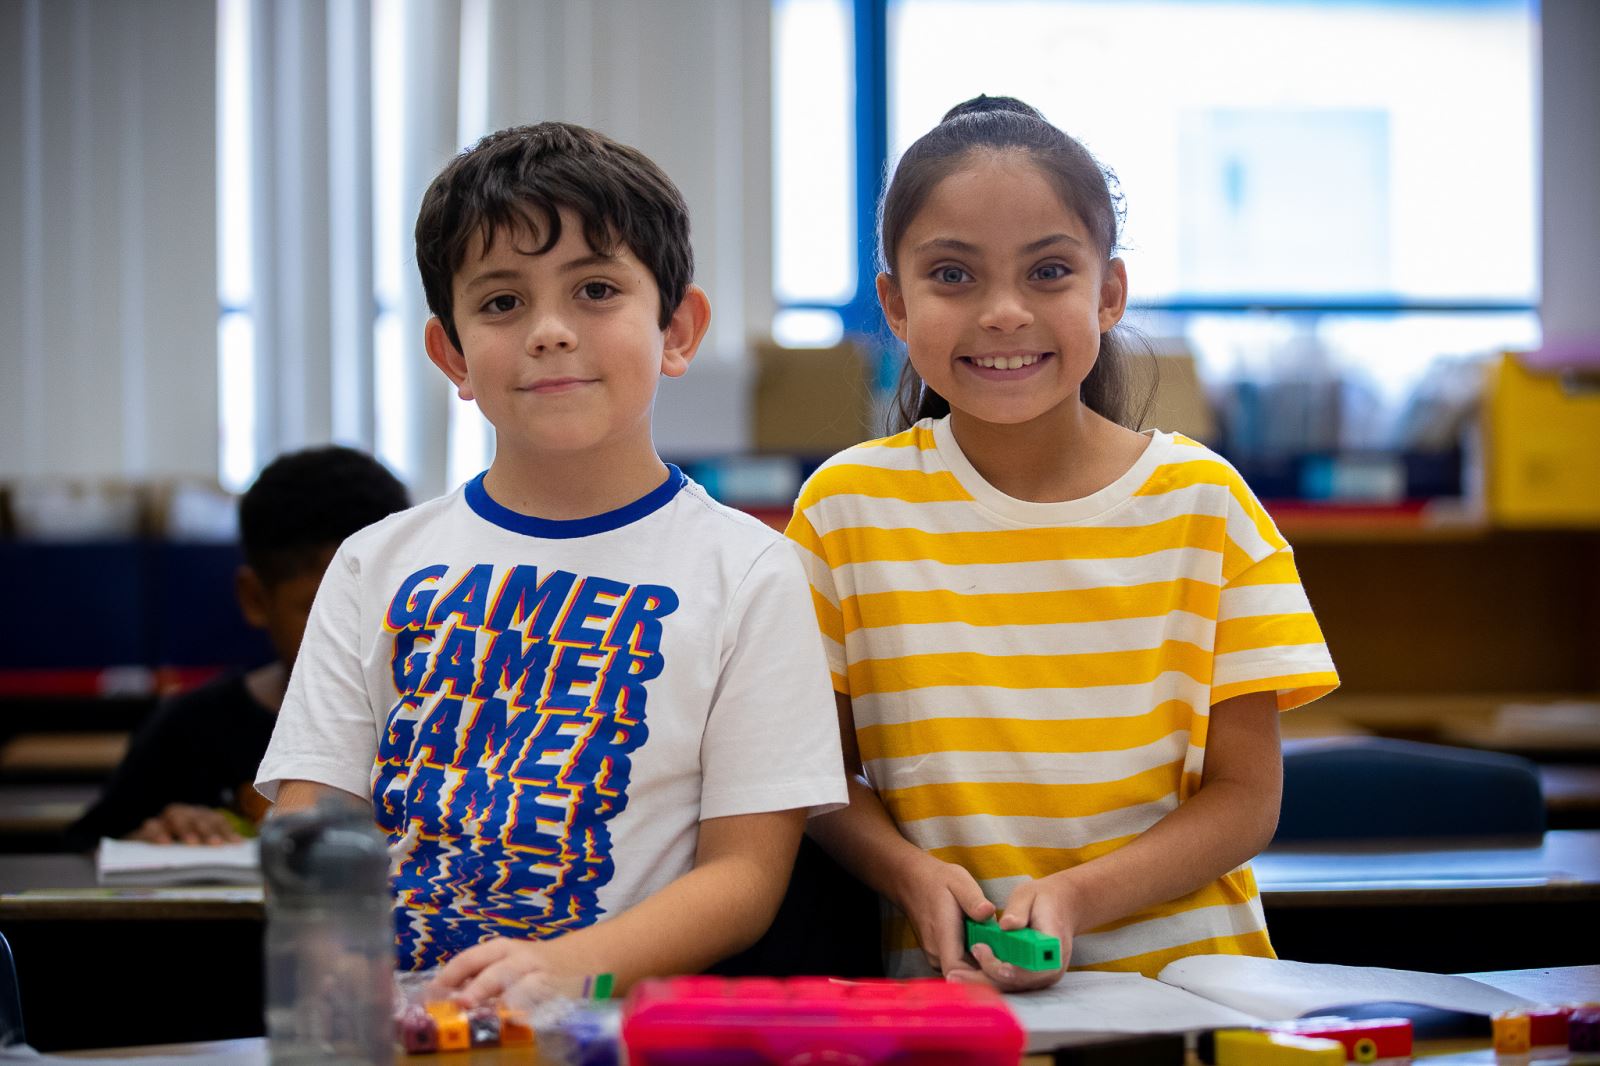 Students smile while building with blocks during the first week of school